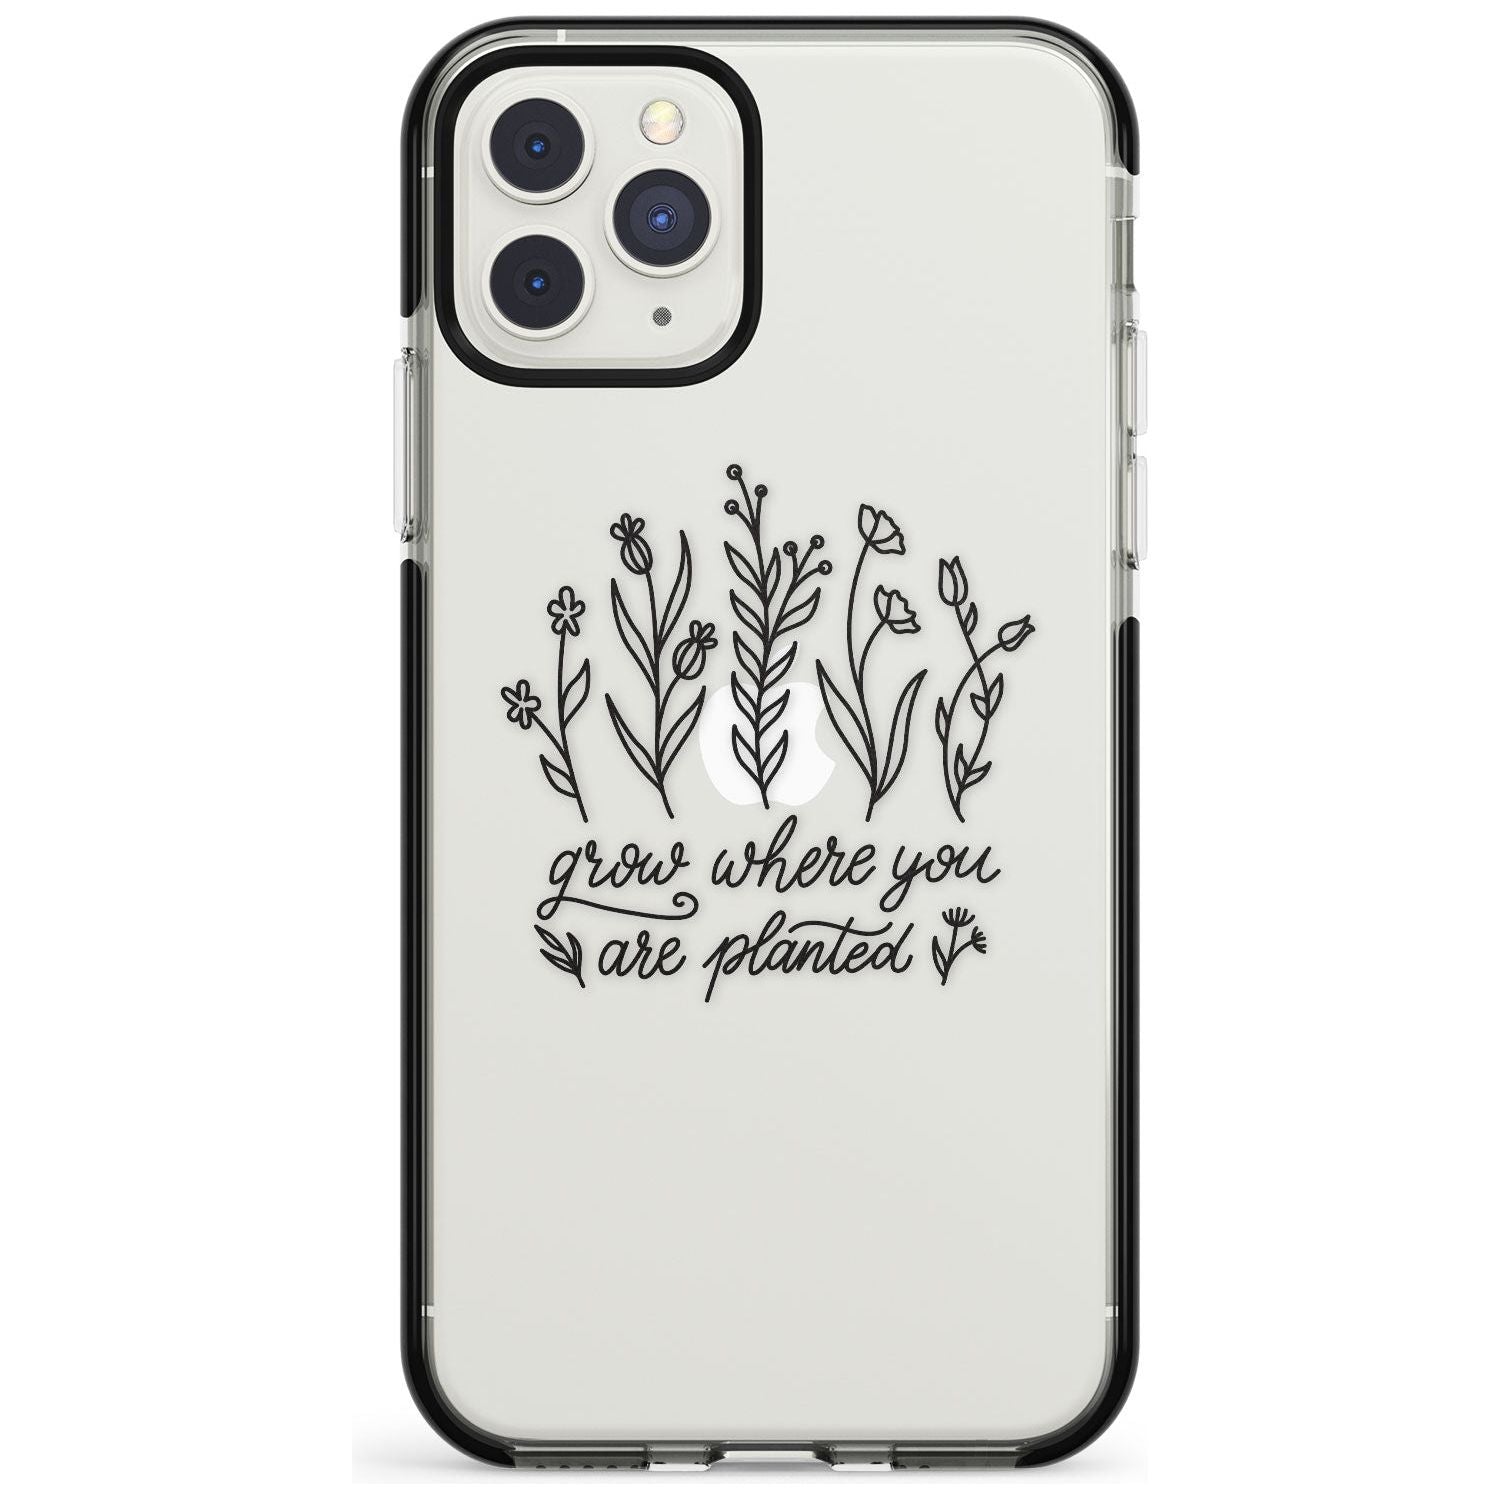 Grow where you are planted Black Impact Phone Case for iPhone 11 Pro Max